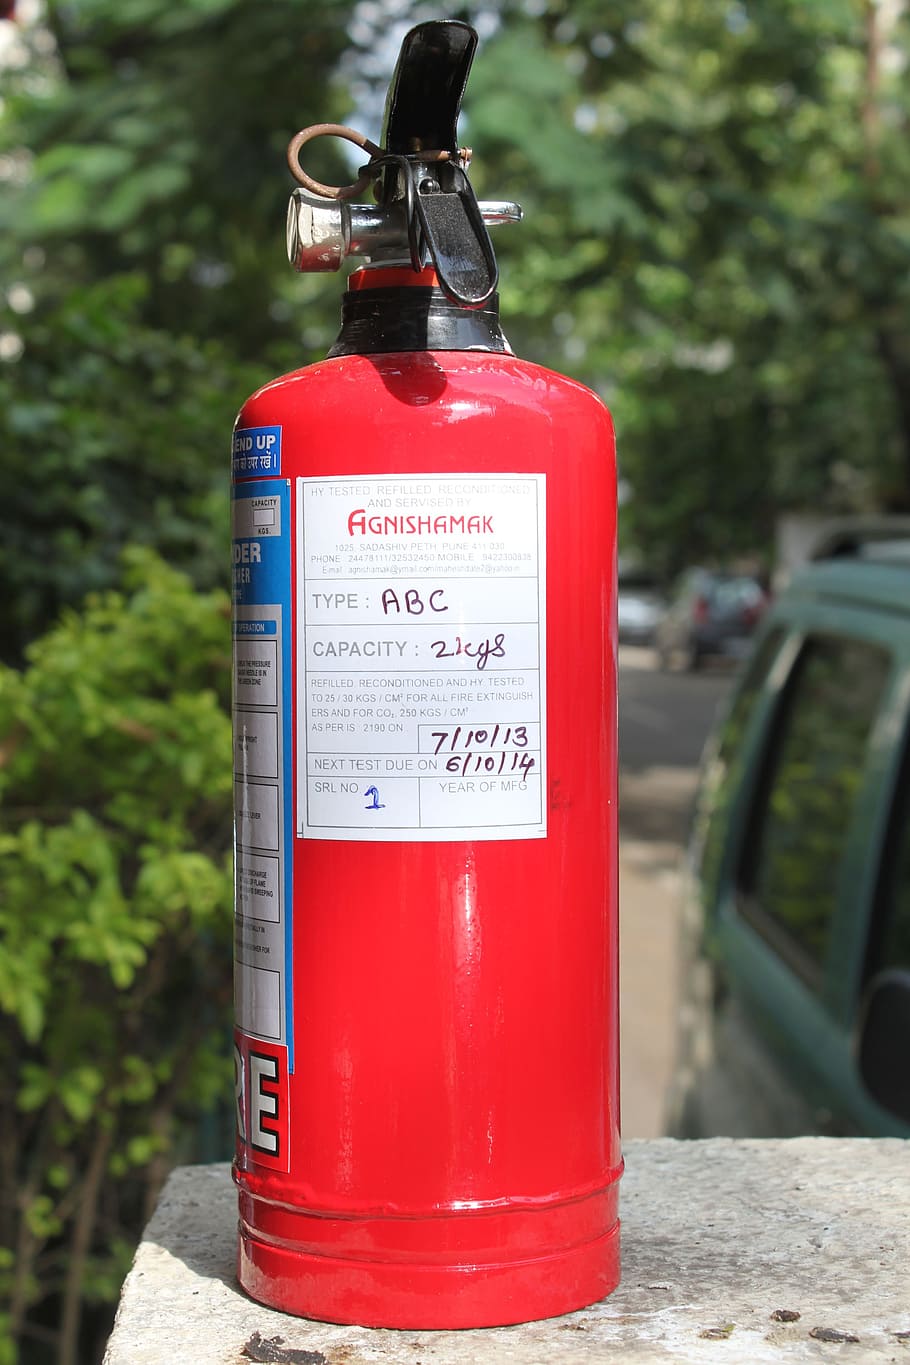 fire extinguisher, safety, device, emergency, red, rescue, extinguish, pressure, text, communication